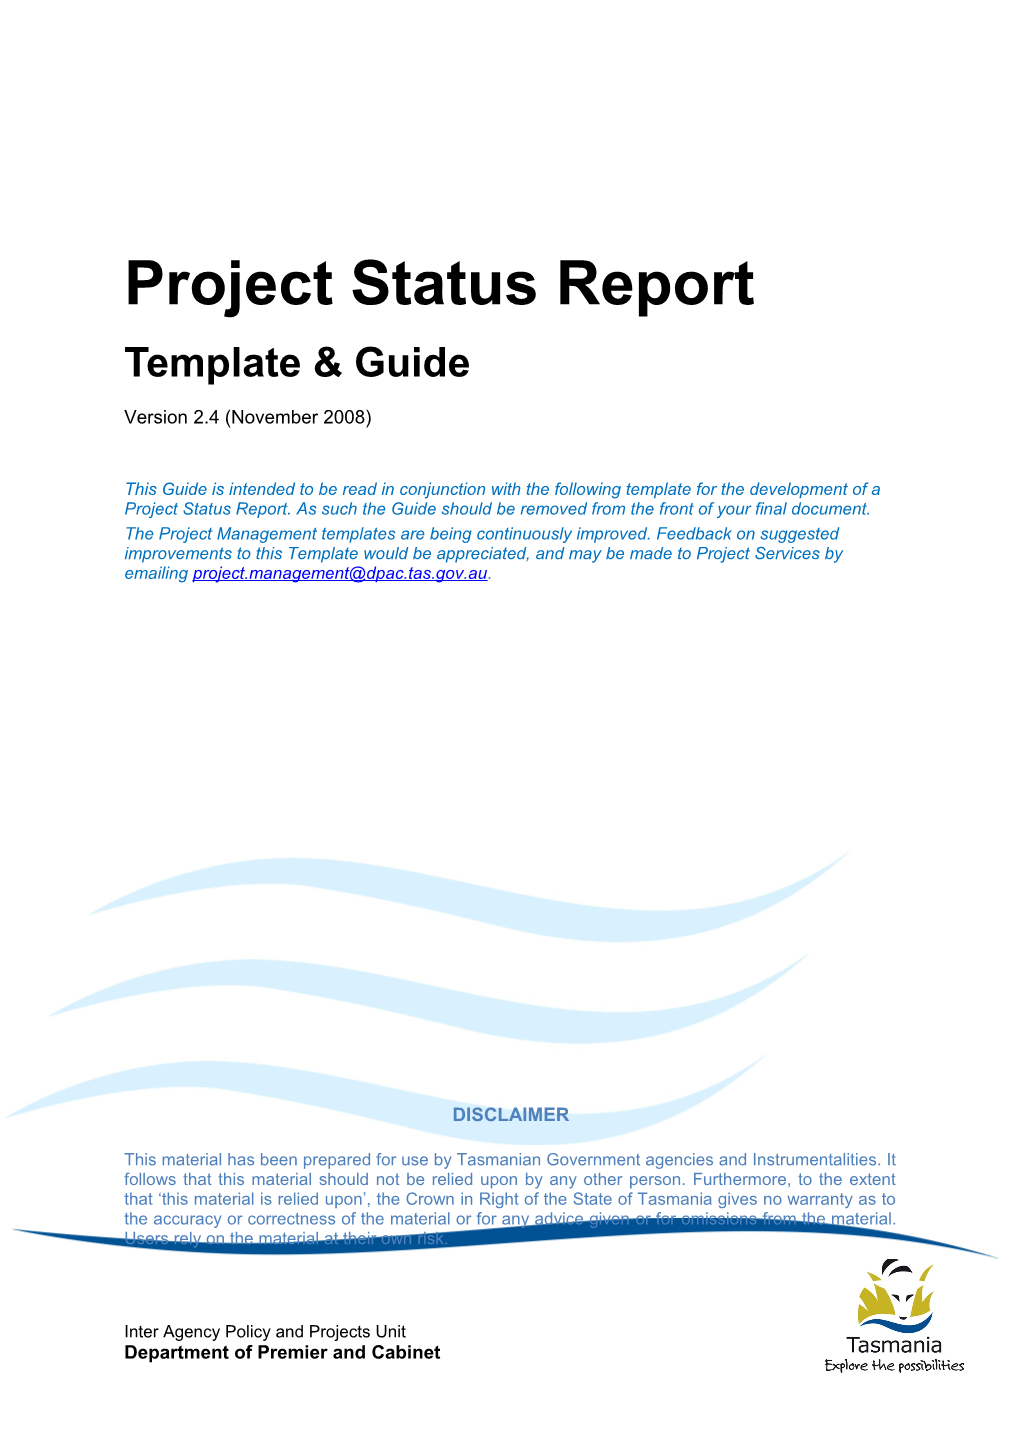 PM 030 Project Status Report: Template and Guide